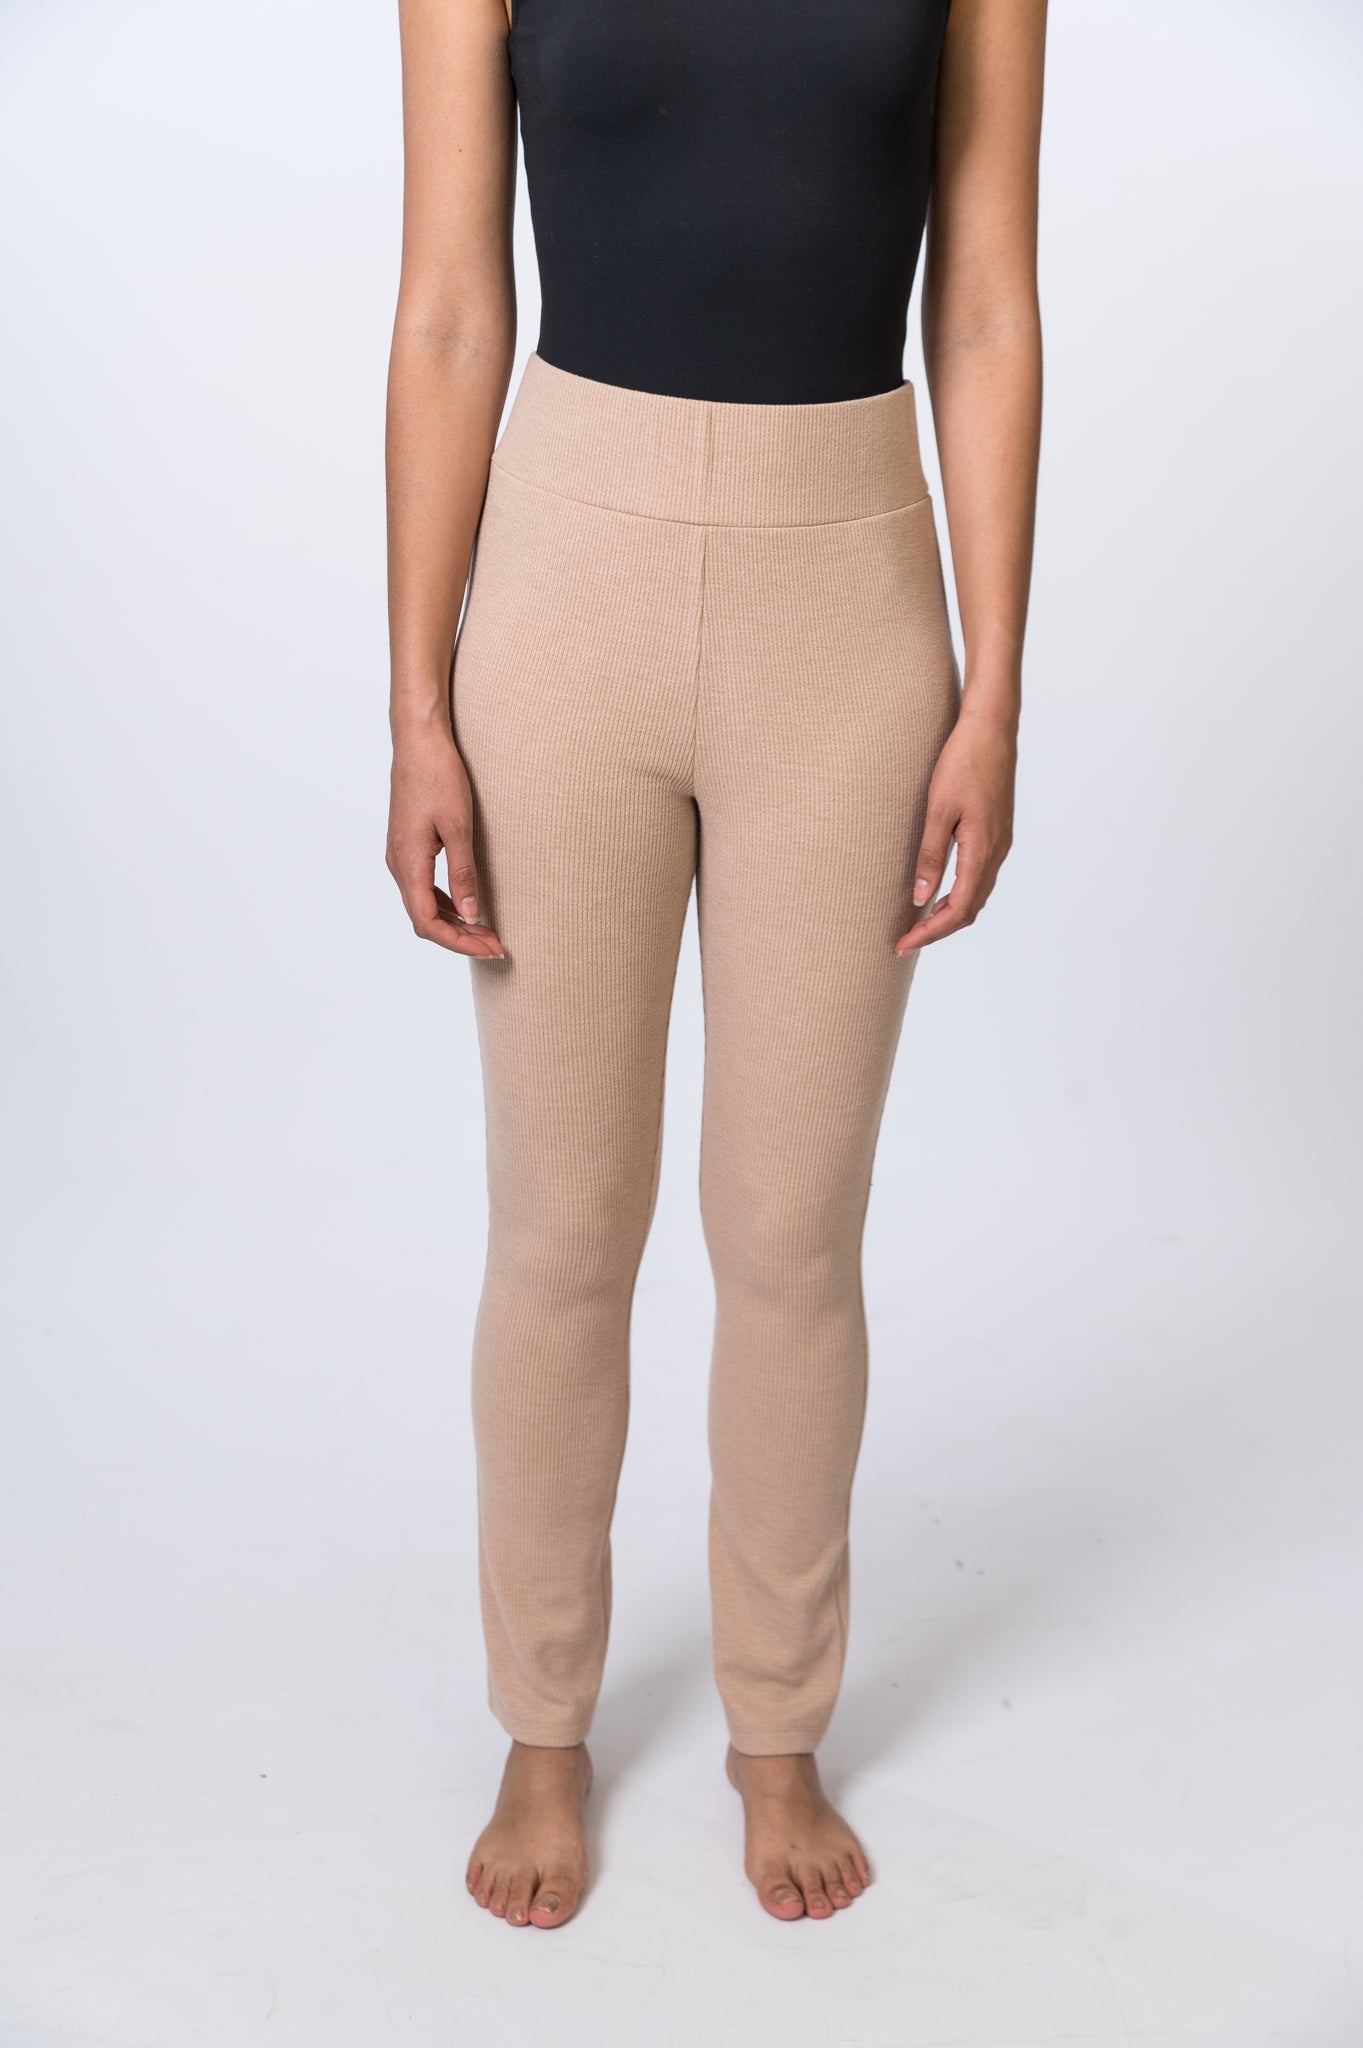 Woman wearing tan, ribbed lounge pants with a black bodysuit. Front of clothing is being shown